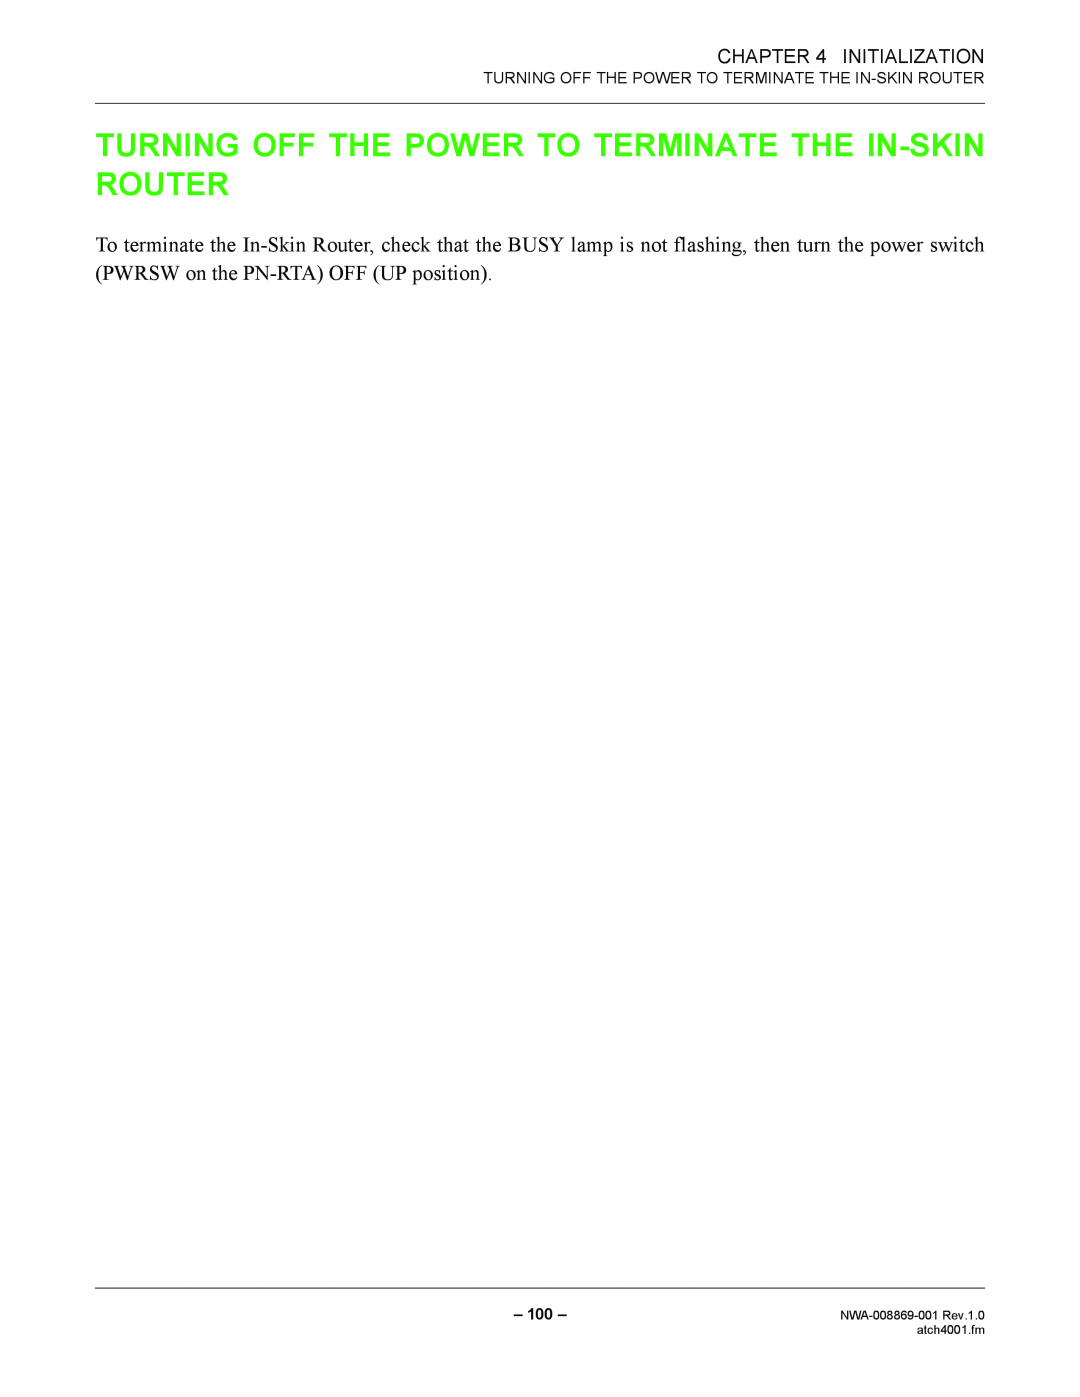 NEC manual Turning Off The Power To Terminate The In-Skin Router, Initialization, NWA-008869-001 Rev.1.0 